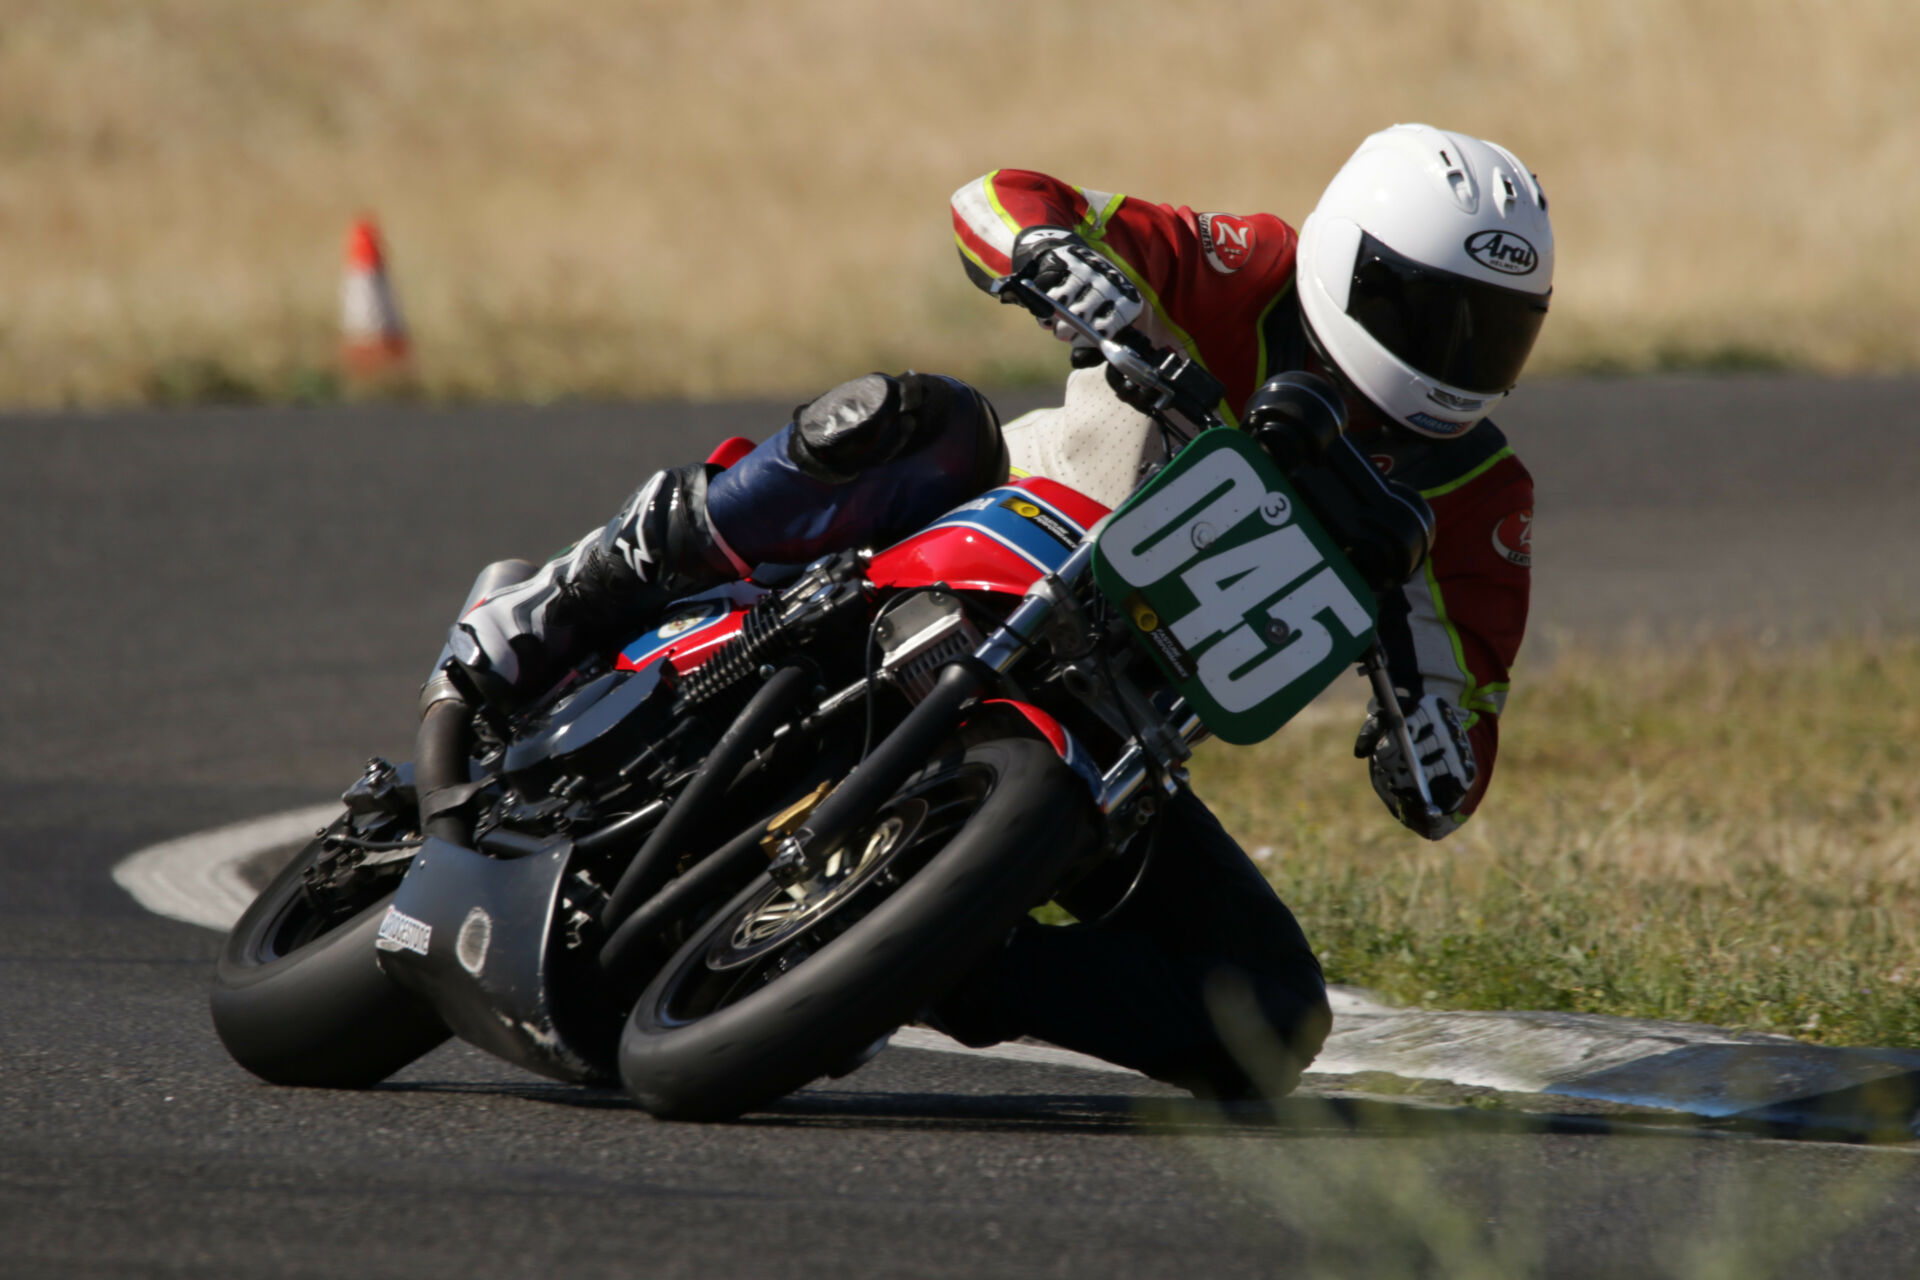 Curtis Adams (045) rode his 1981 Honda CB750F to victories in both AHRMA Vintage Cup races featuring the Vintage Superbike Heavyweight class at Thunderhill Raceway Park. Photo by Max Klein, Oxymoron Photography, courtesy AHRMA.